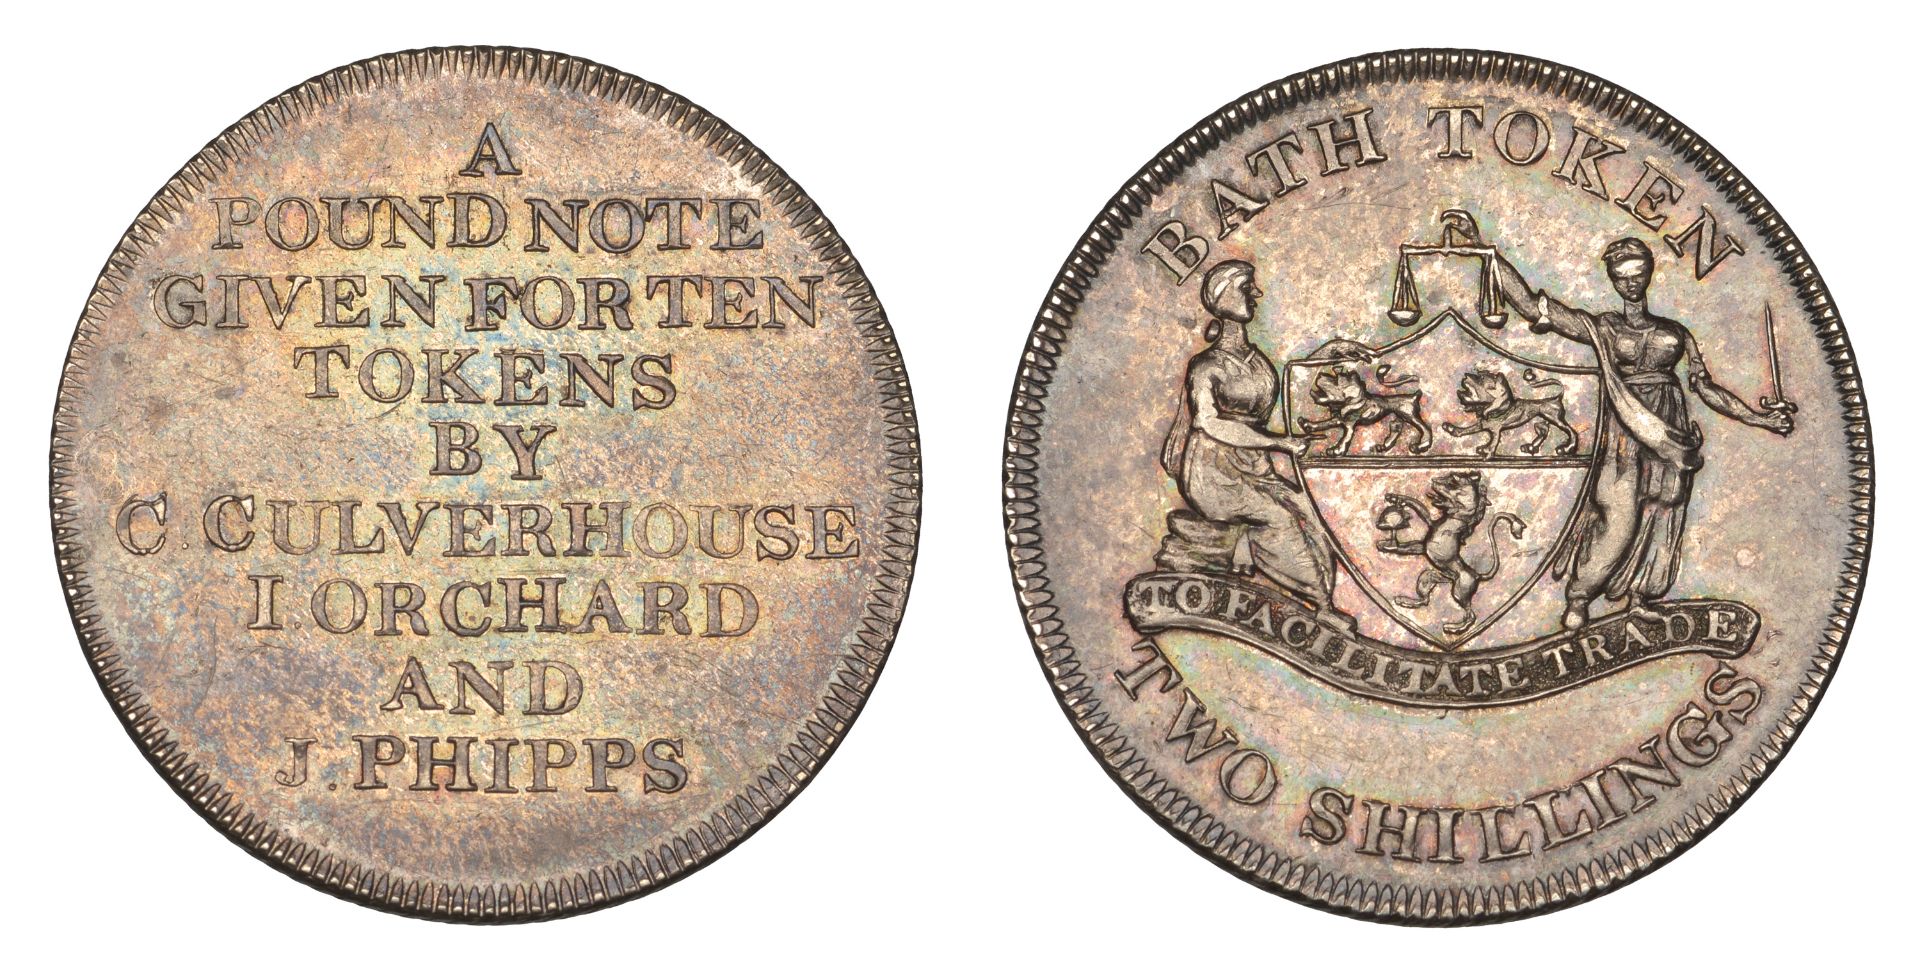 19th Century Tokens, SOMERSET, Bath, Charles Culverhouse, Isaac Orchard and James Phipps, Tw...